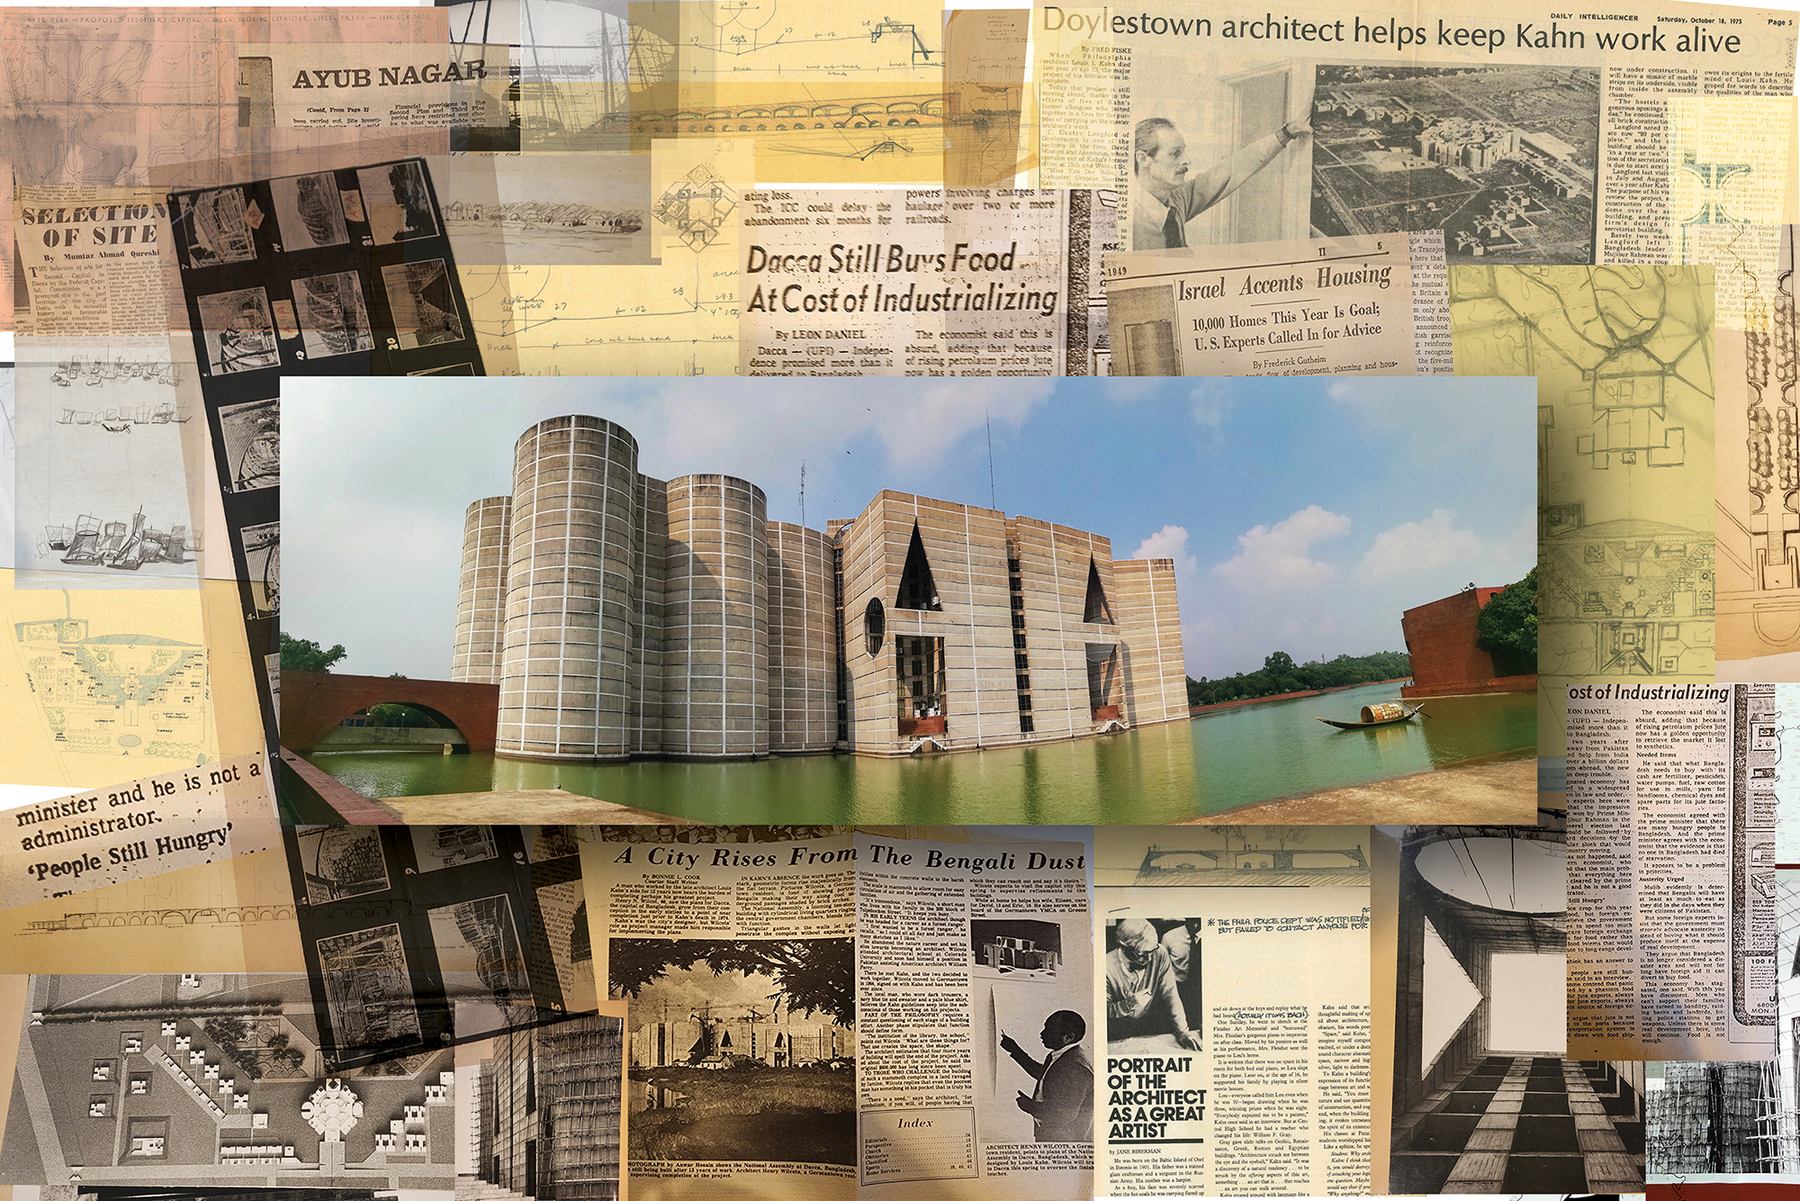 A collage of materials from Louis I. Kahn.